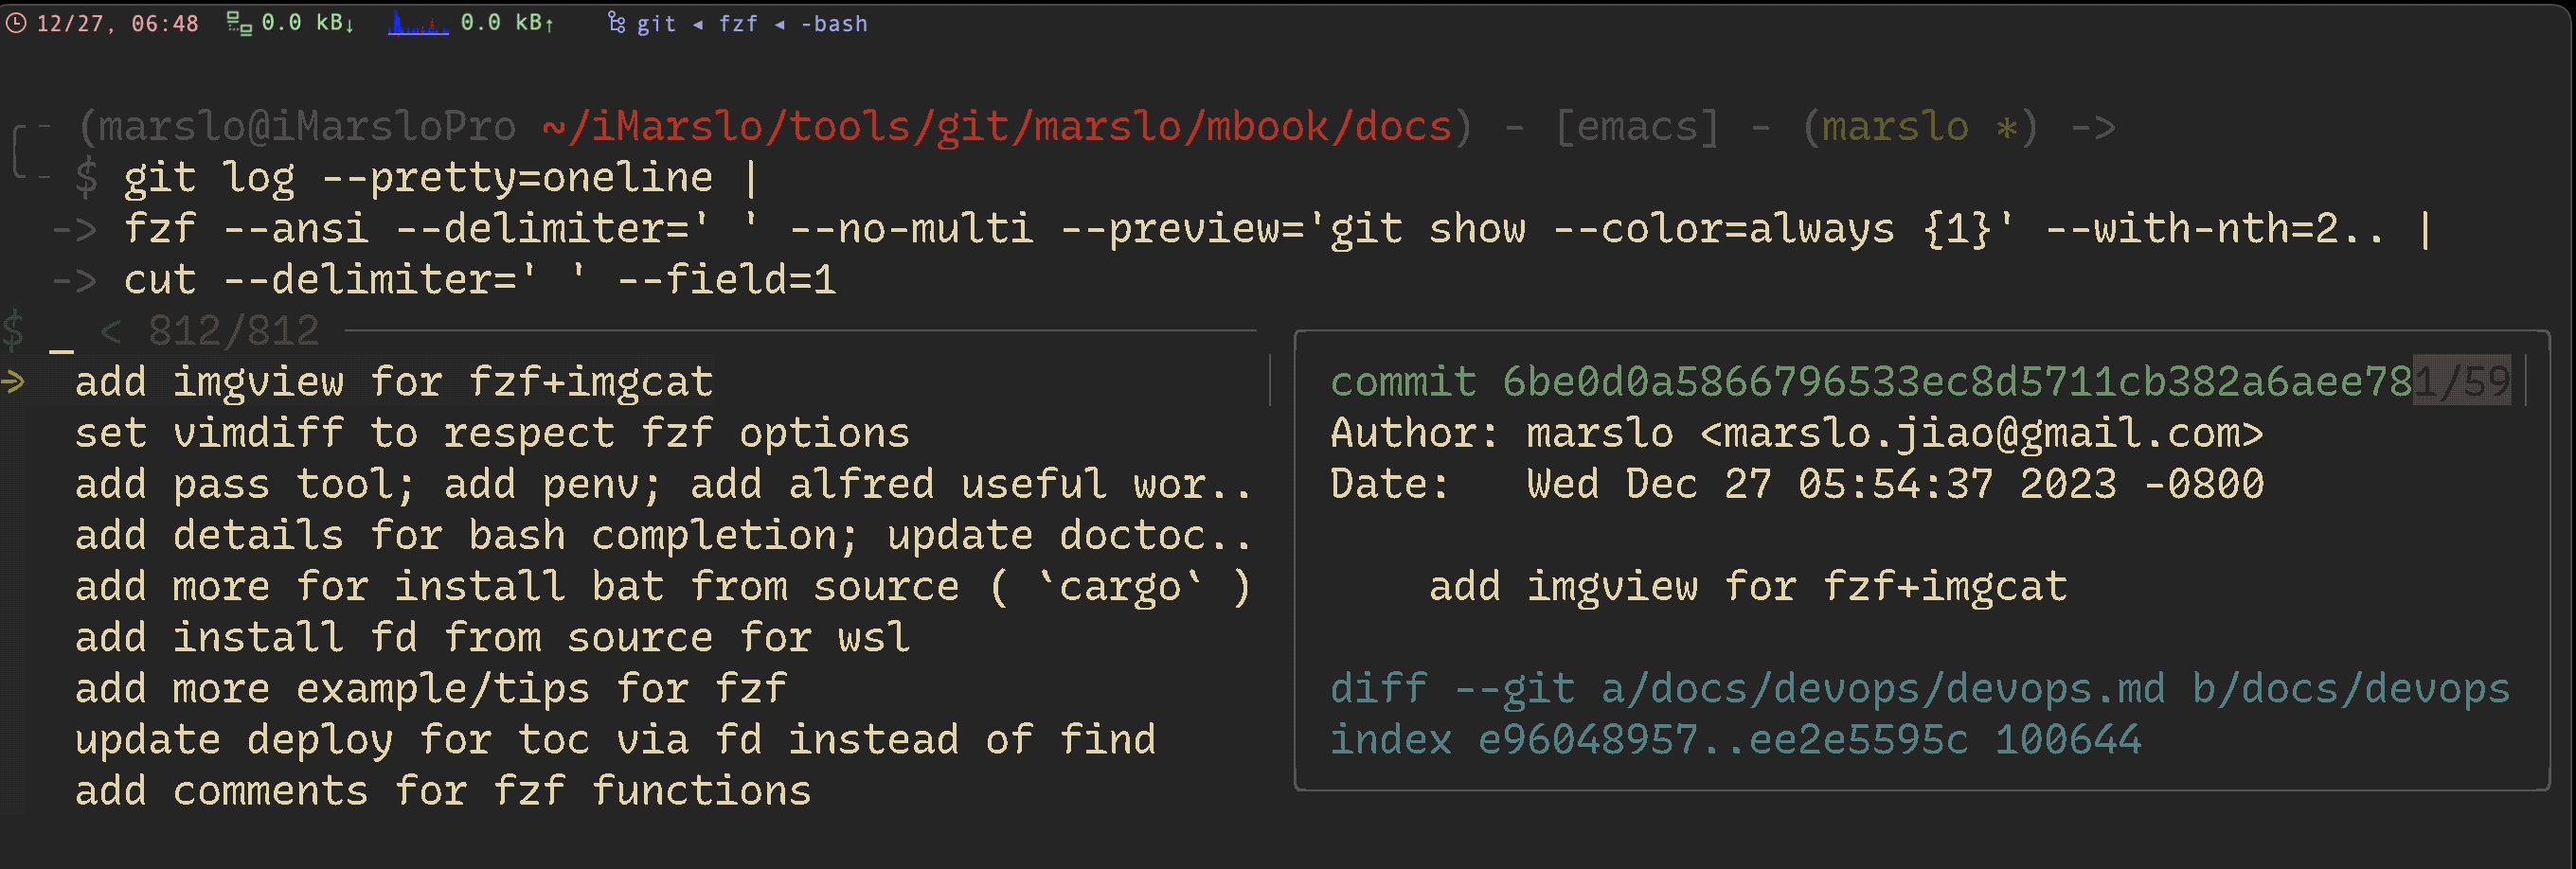 git with-nth for git comments